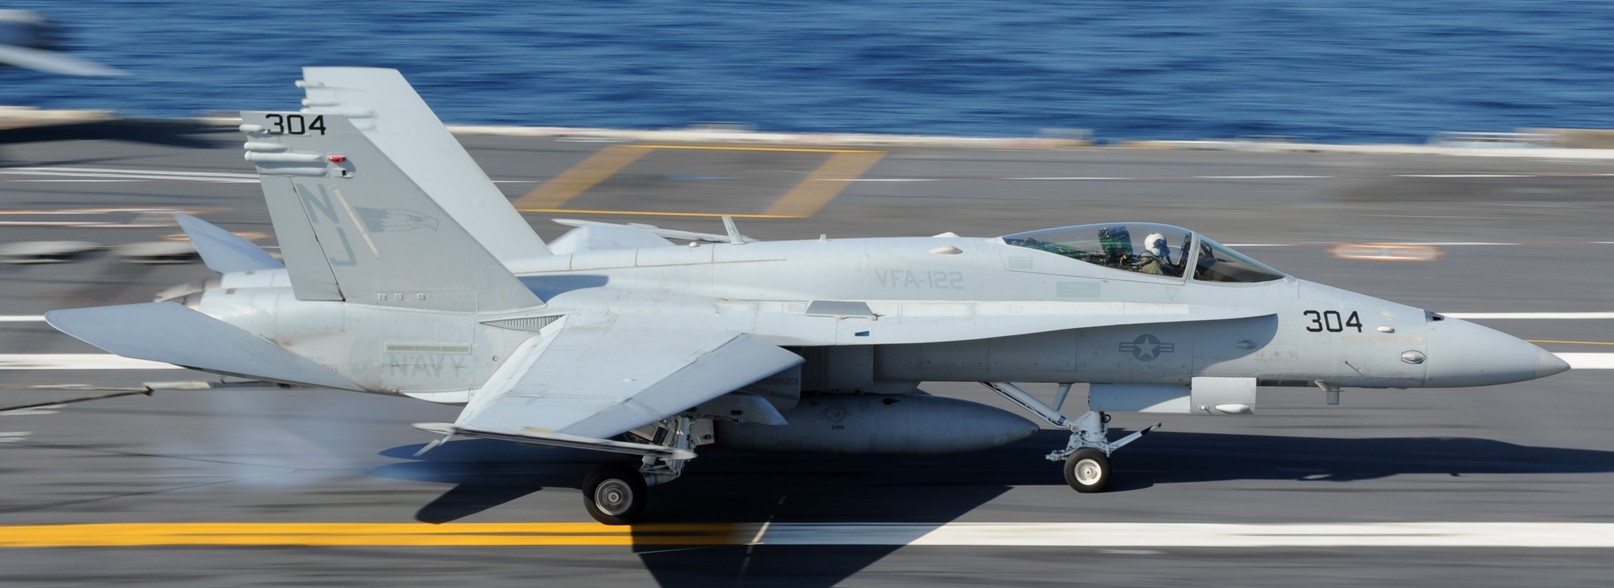 vfa-122 flying eagles strike fighter squadron f/a-18c hornet 2012 27 fleet replacement frs nas lemoore